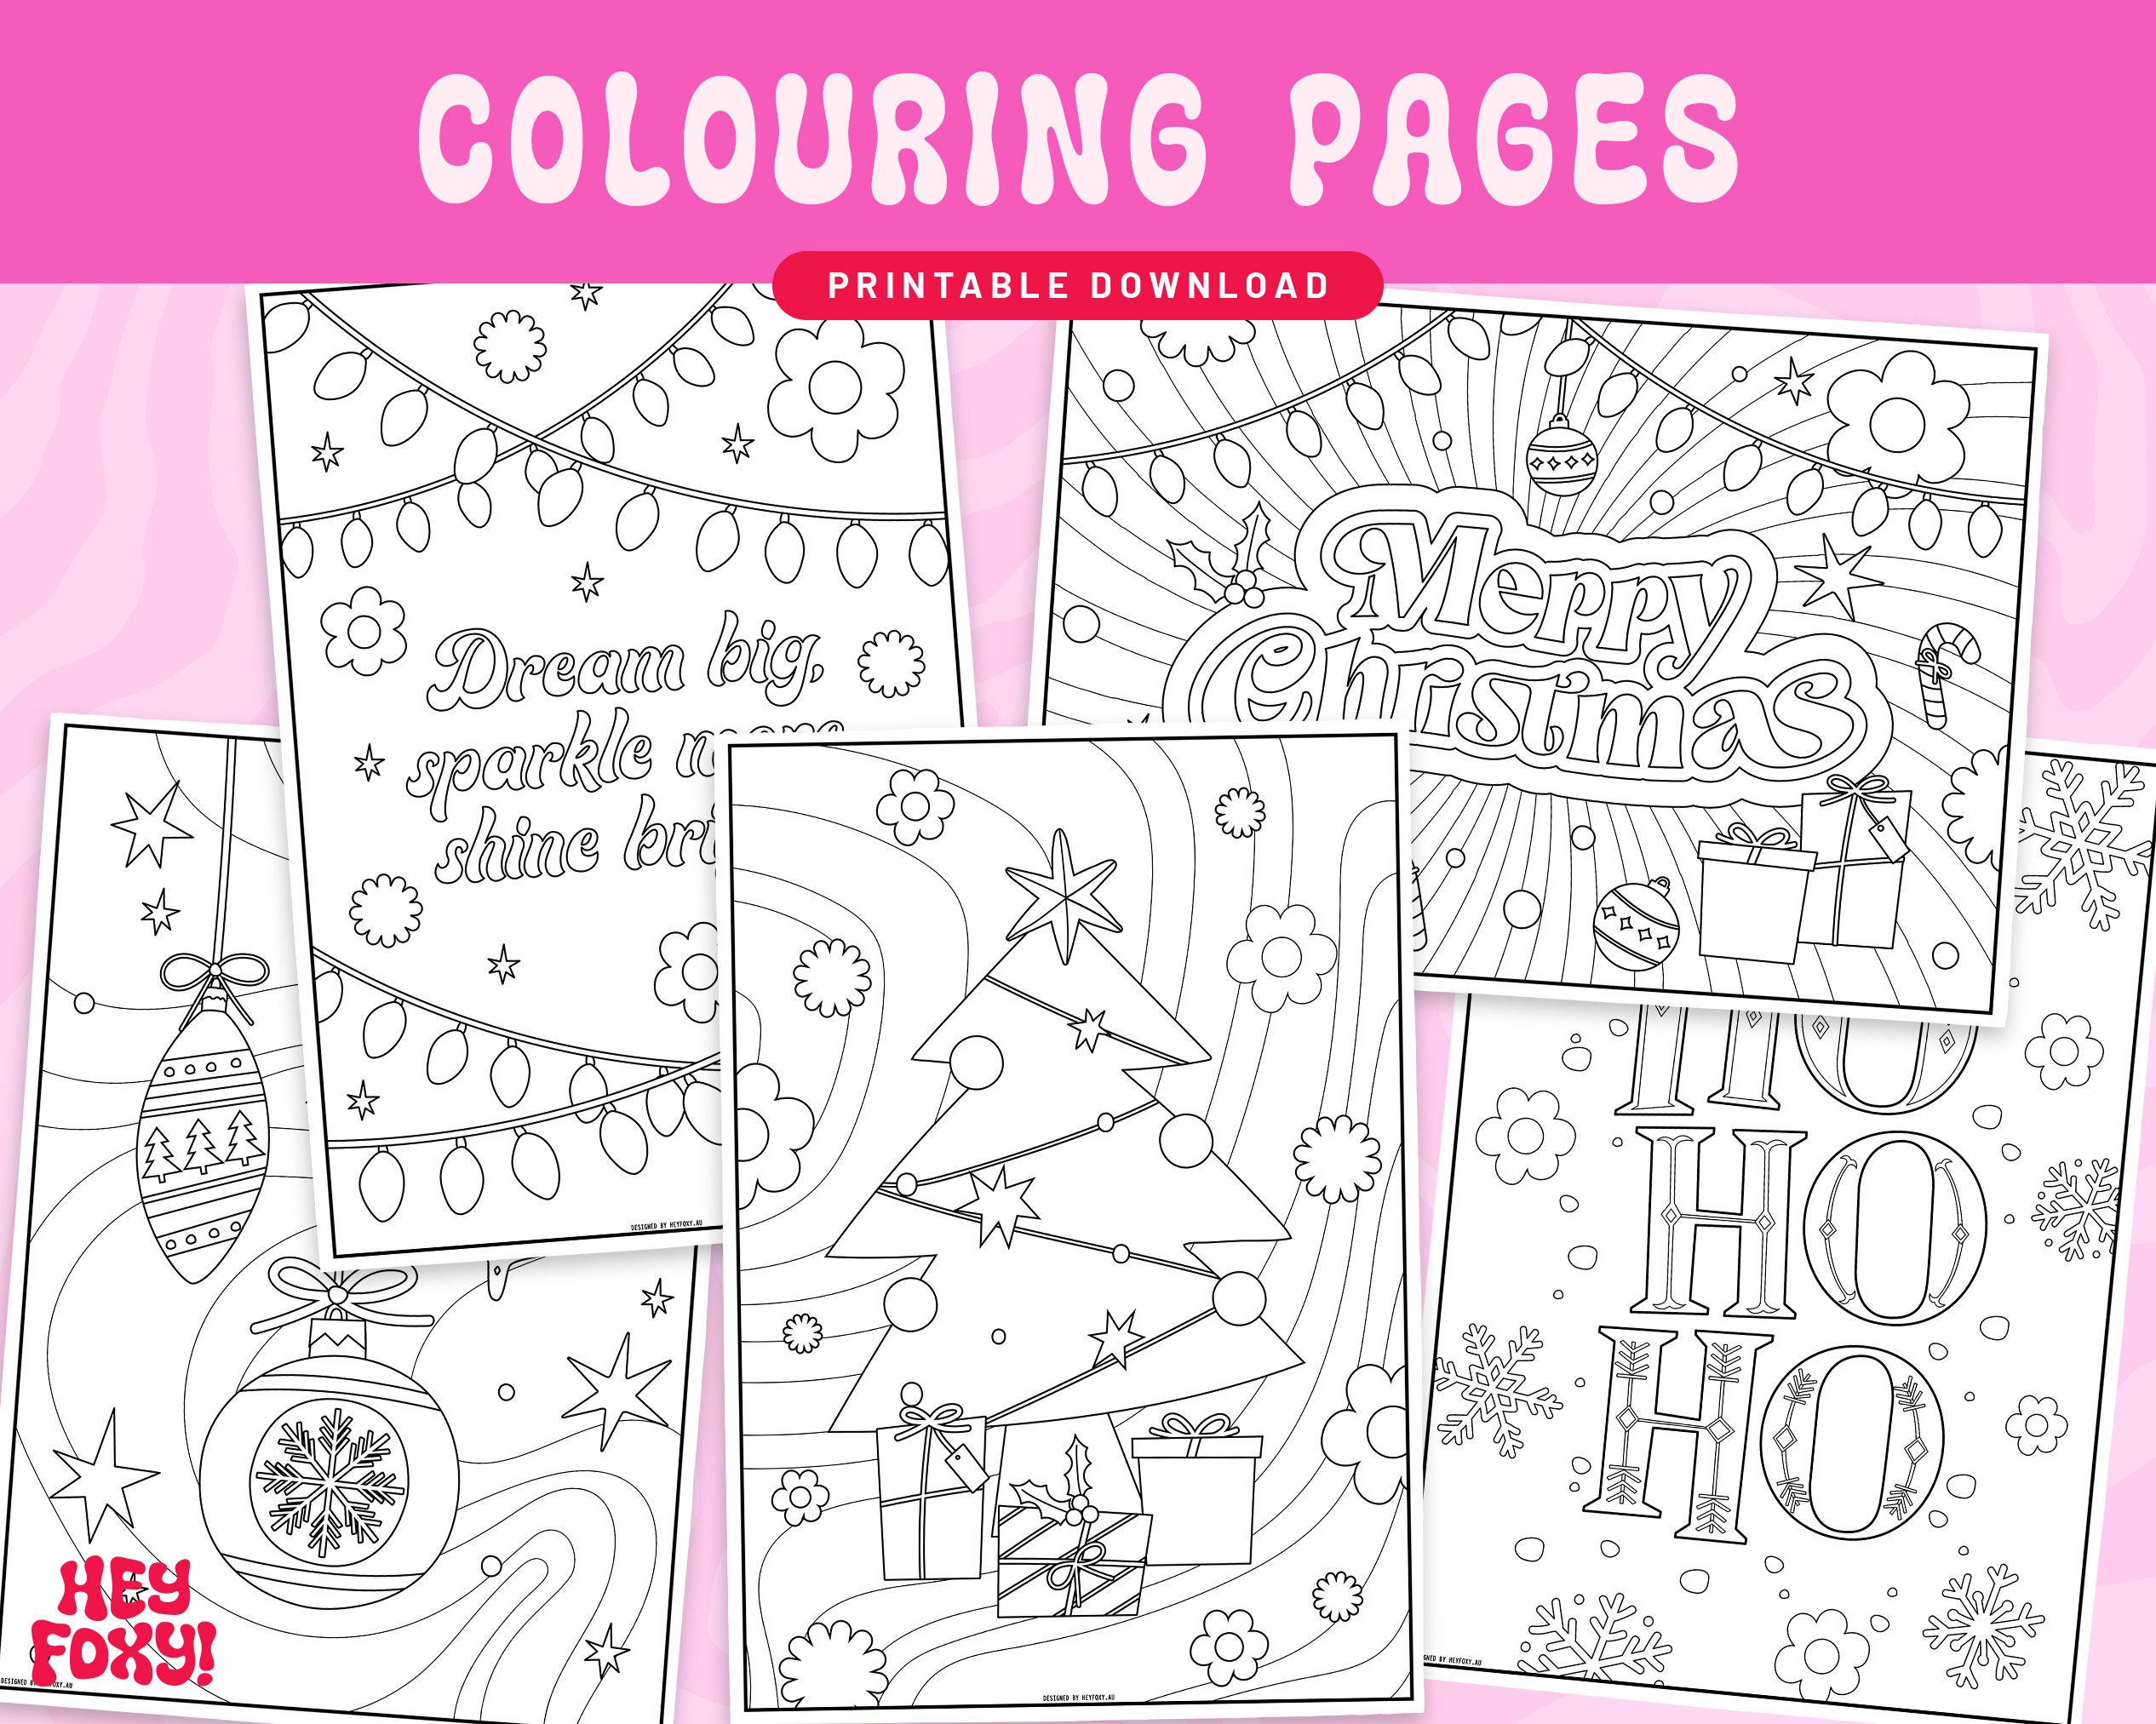 10 Christmas Coloring Pages: PDF Coloring Christmas Printables, Winter Coloring  Sheets, Holiday Coloring Pages, Christmas Activity Page 